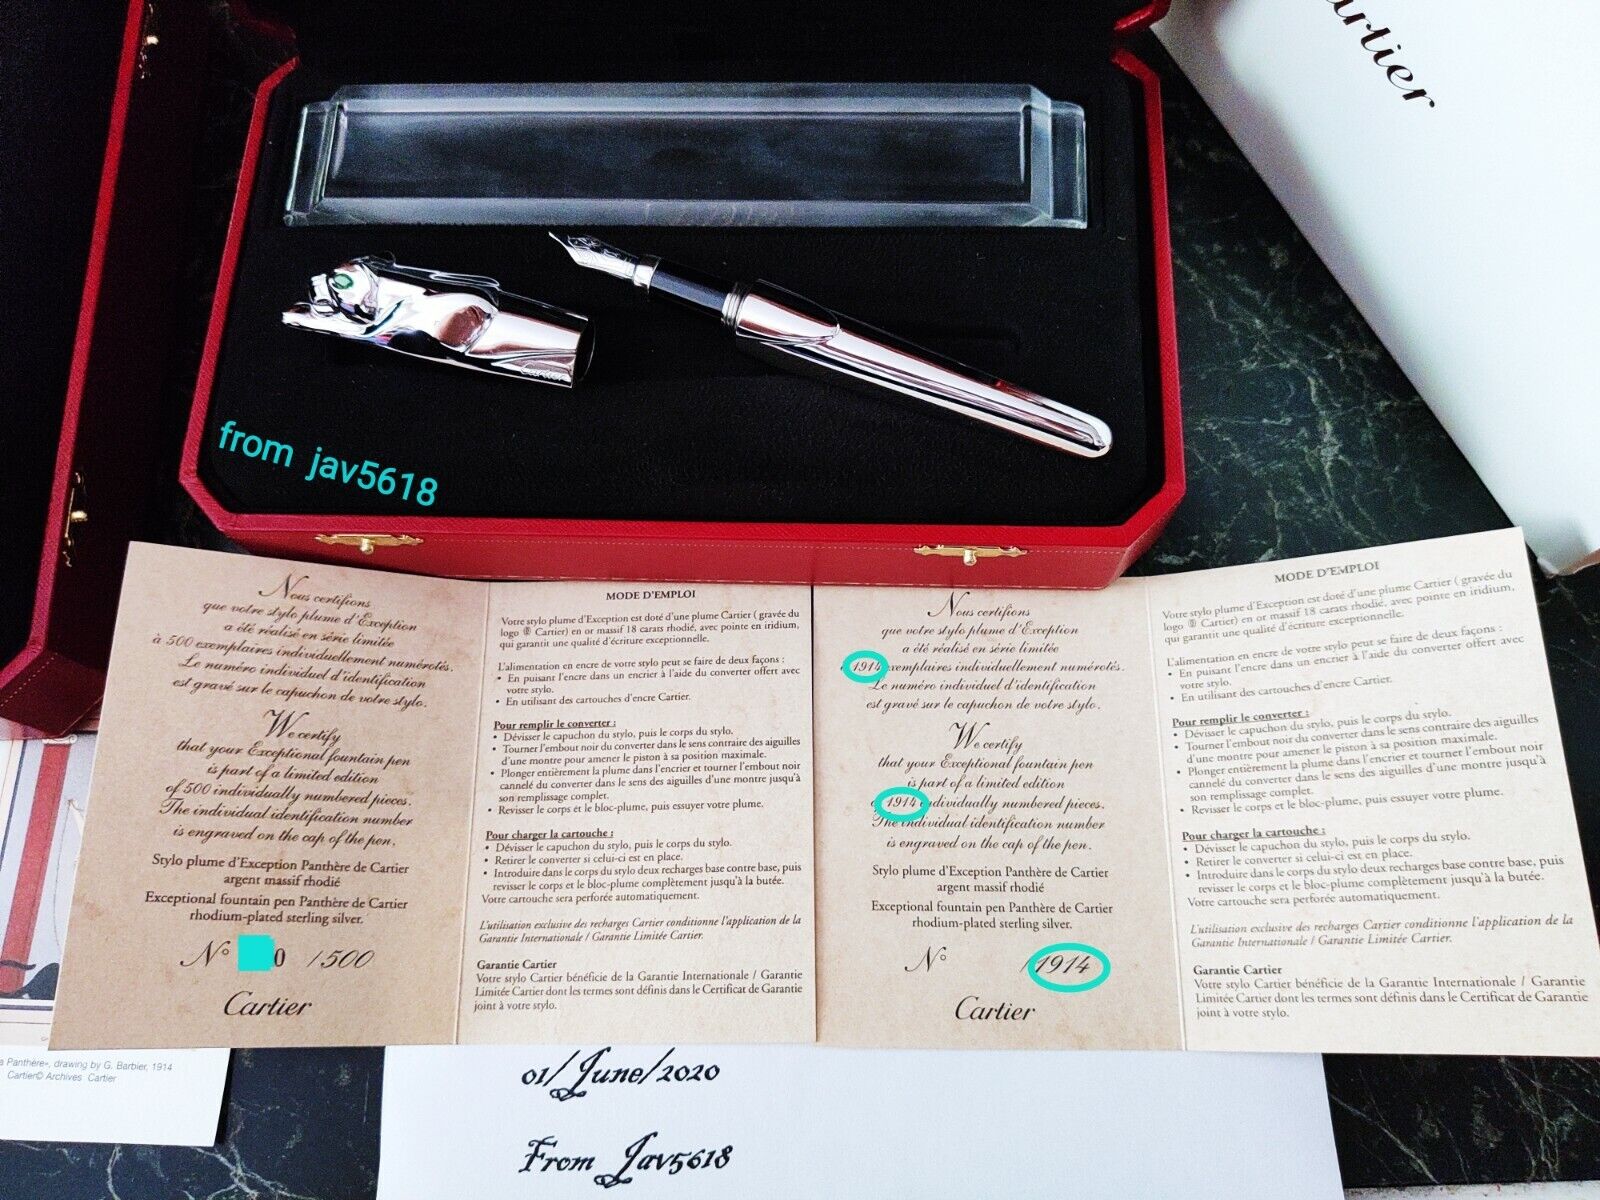 CARTIER PANTHERE PANTHER FOUNTAIN PEN EXCEPTIONAL,ART💎RELIC,RAREST,NEW,💎💎💎